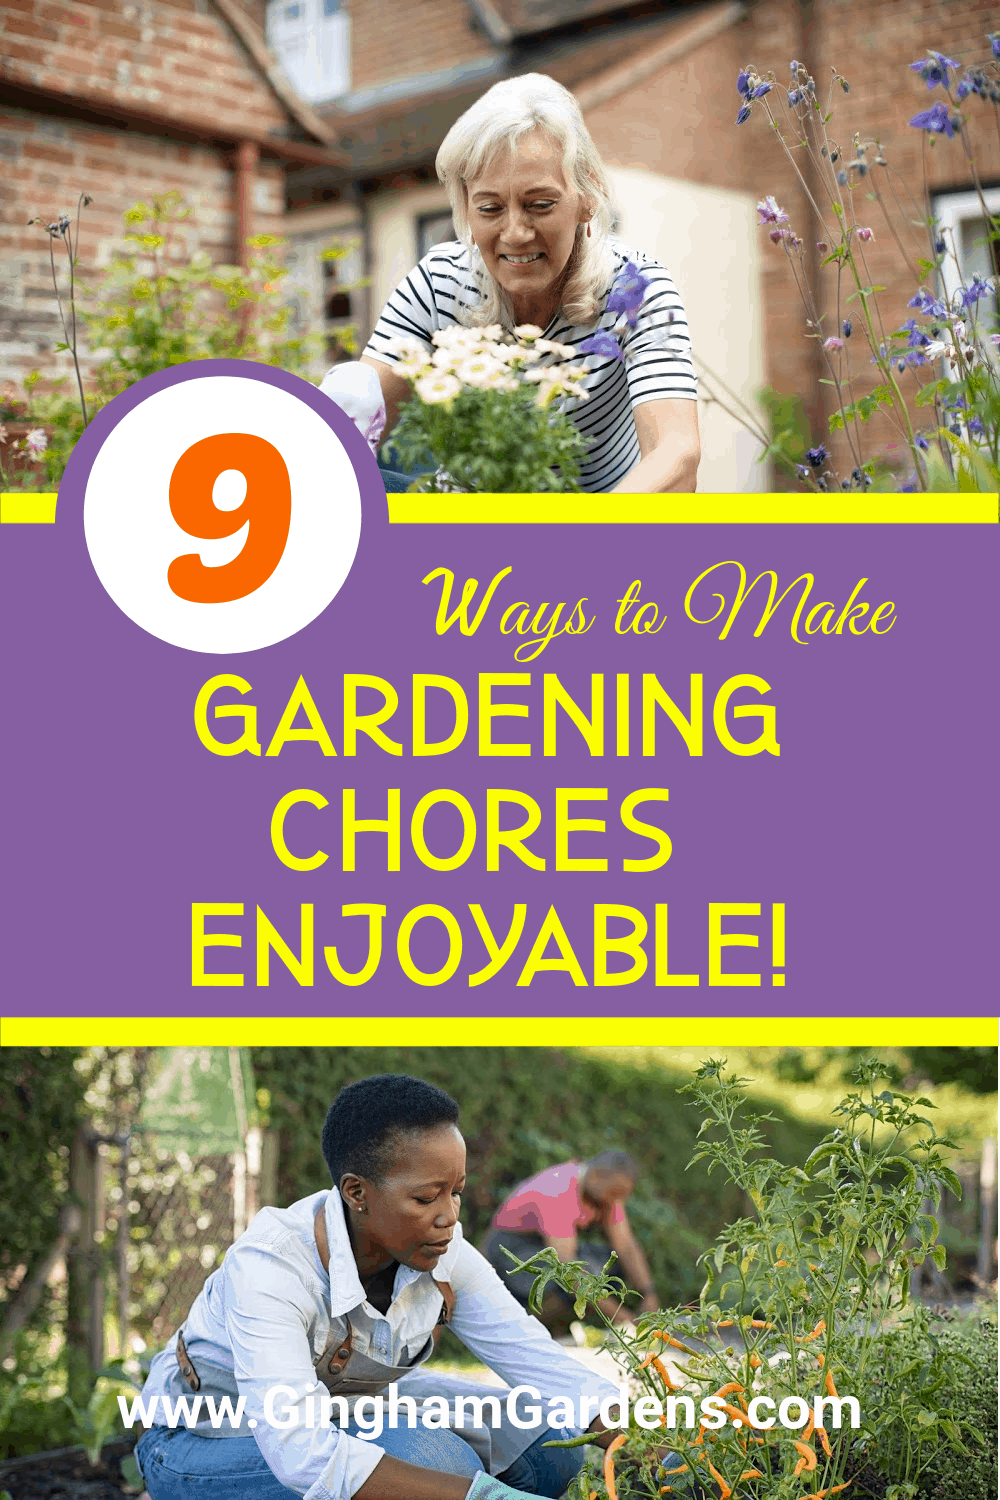 Images of Gardeners working in Gardens with text overlay - 9 Ways to Make Gardening Chores Enjoyable